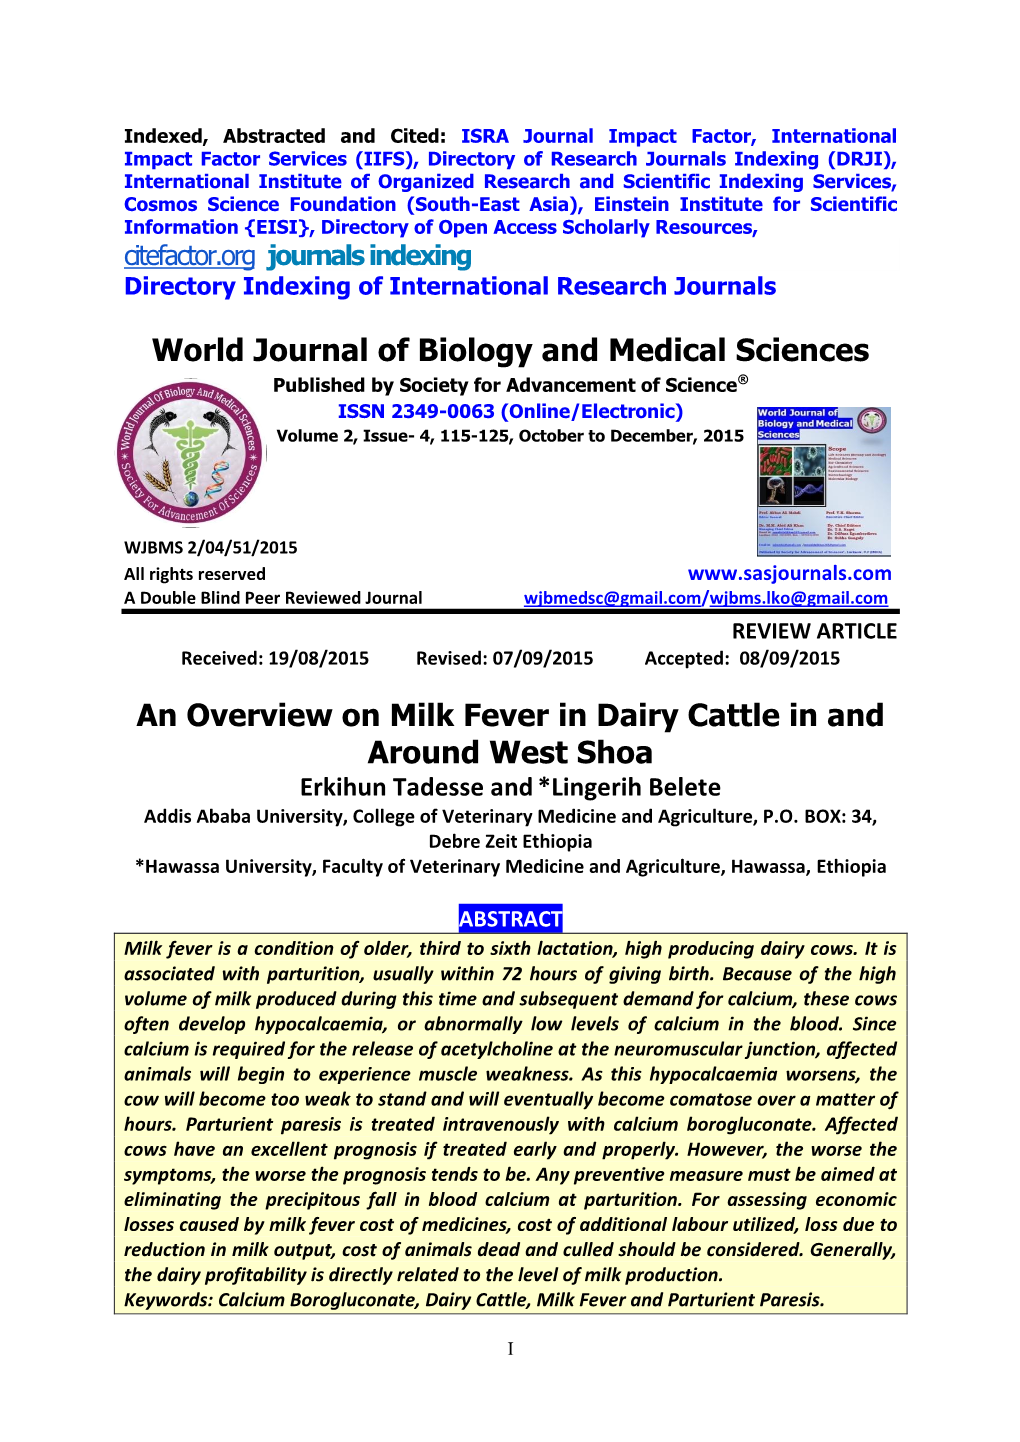 World Journal of Biology and Medical Sciences an Overview on Milk